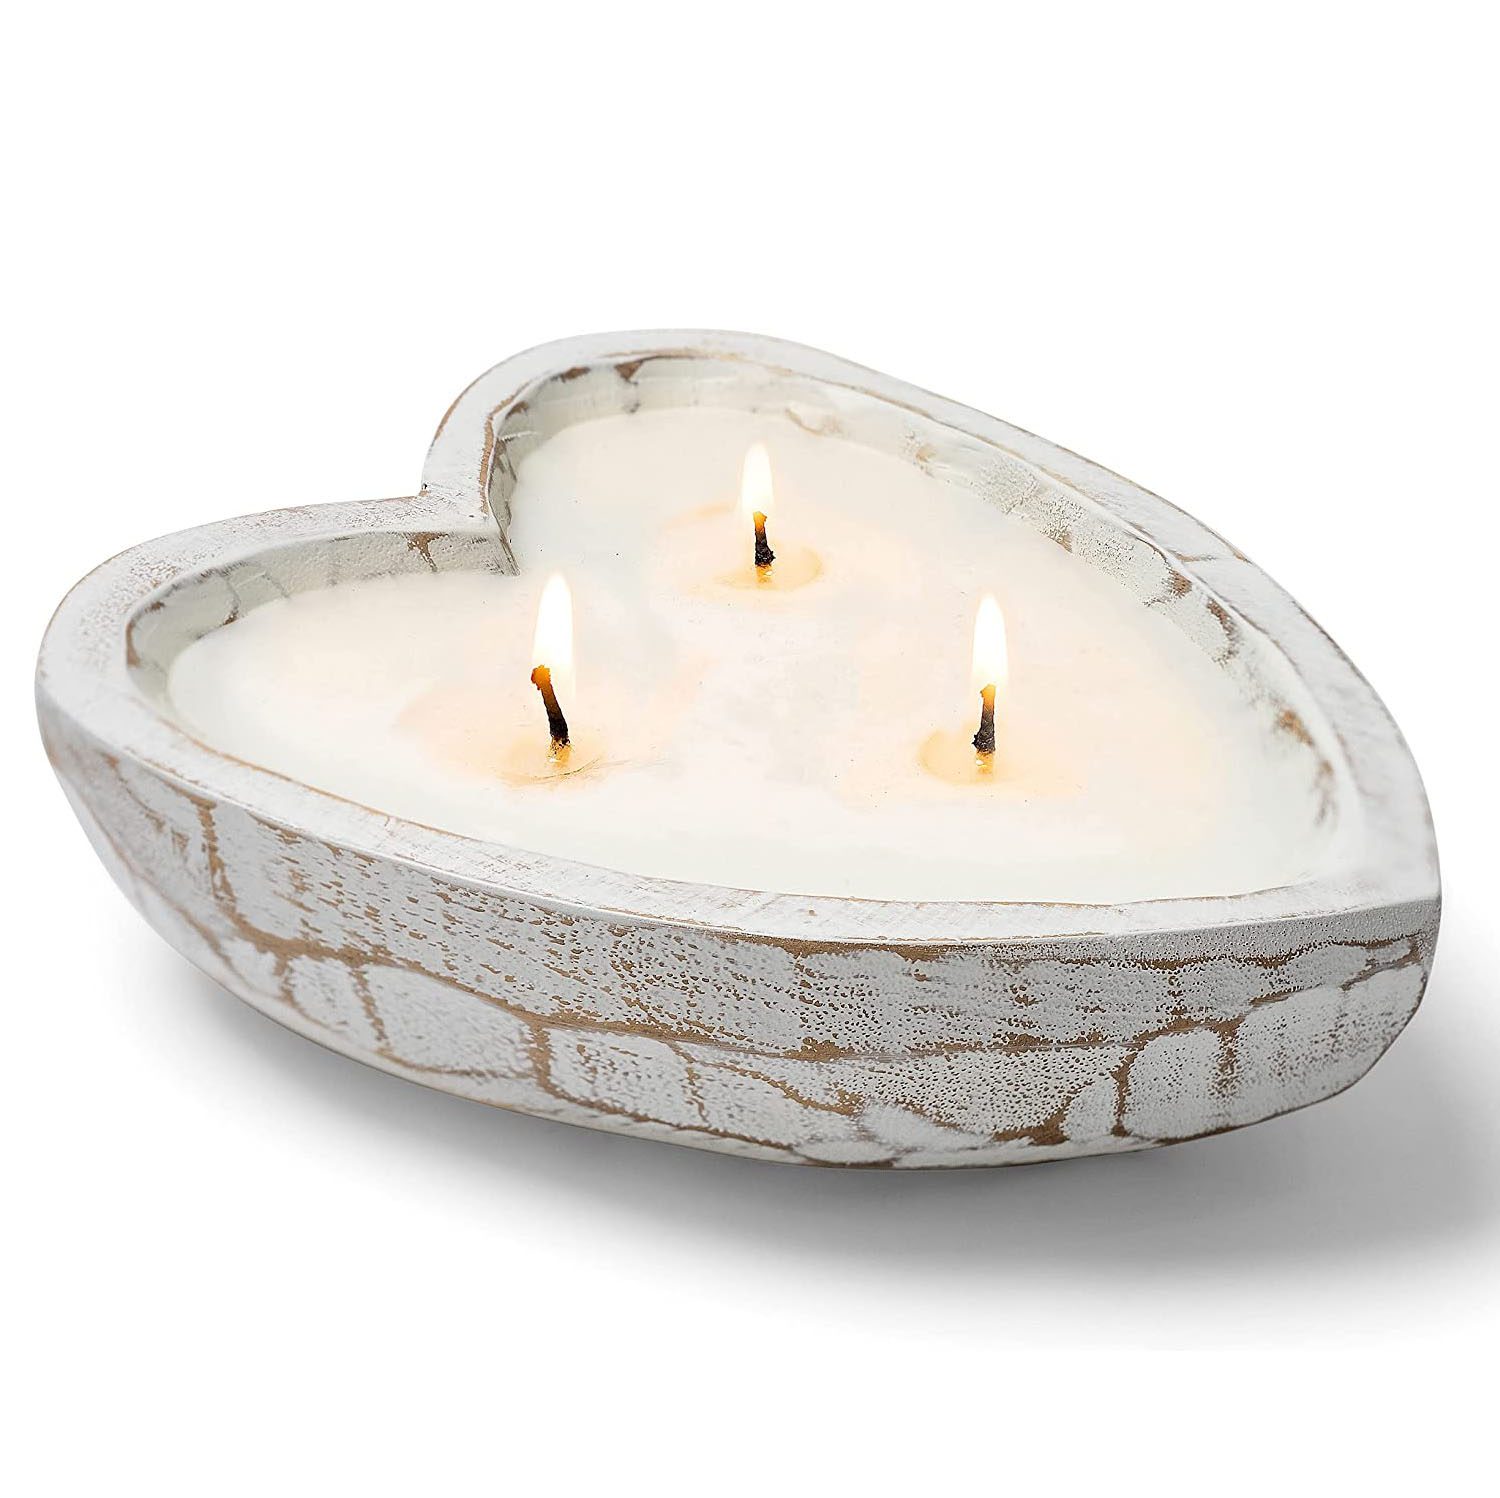 MWC-03 New Home Gifts for Home, All Natural Wooden Boat Spa Crystal Candle, Organic Wood Dough Bowl Candle